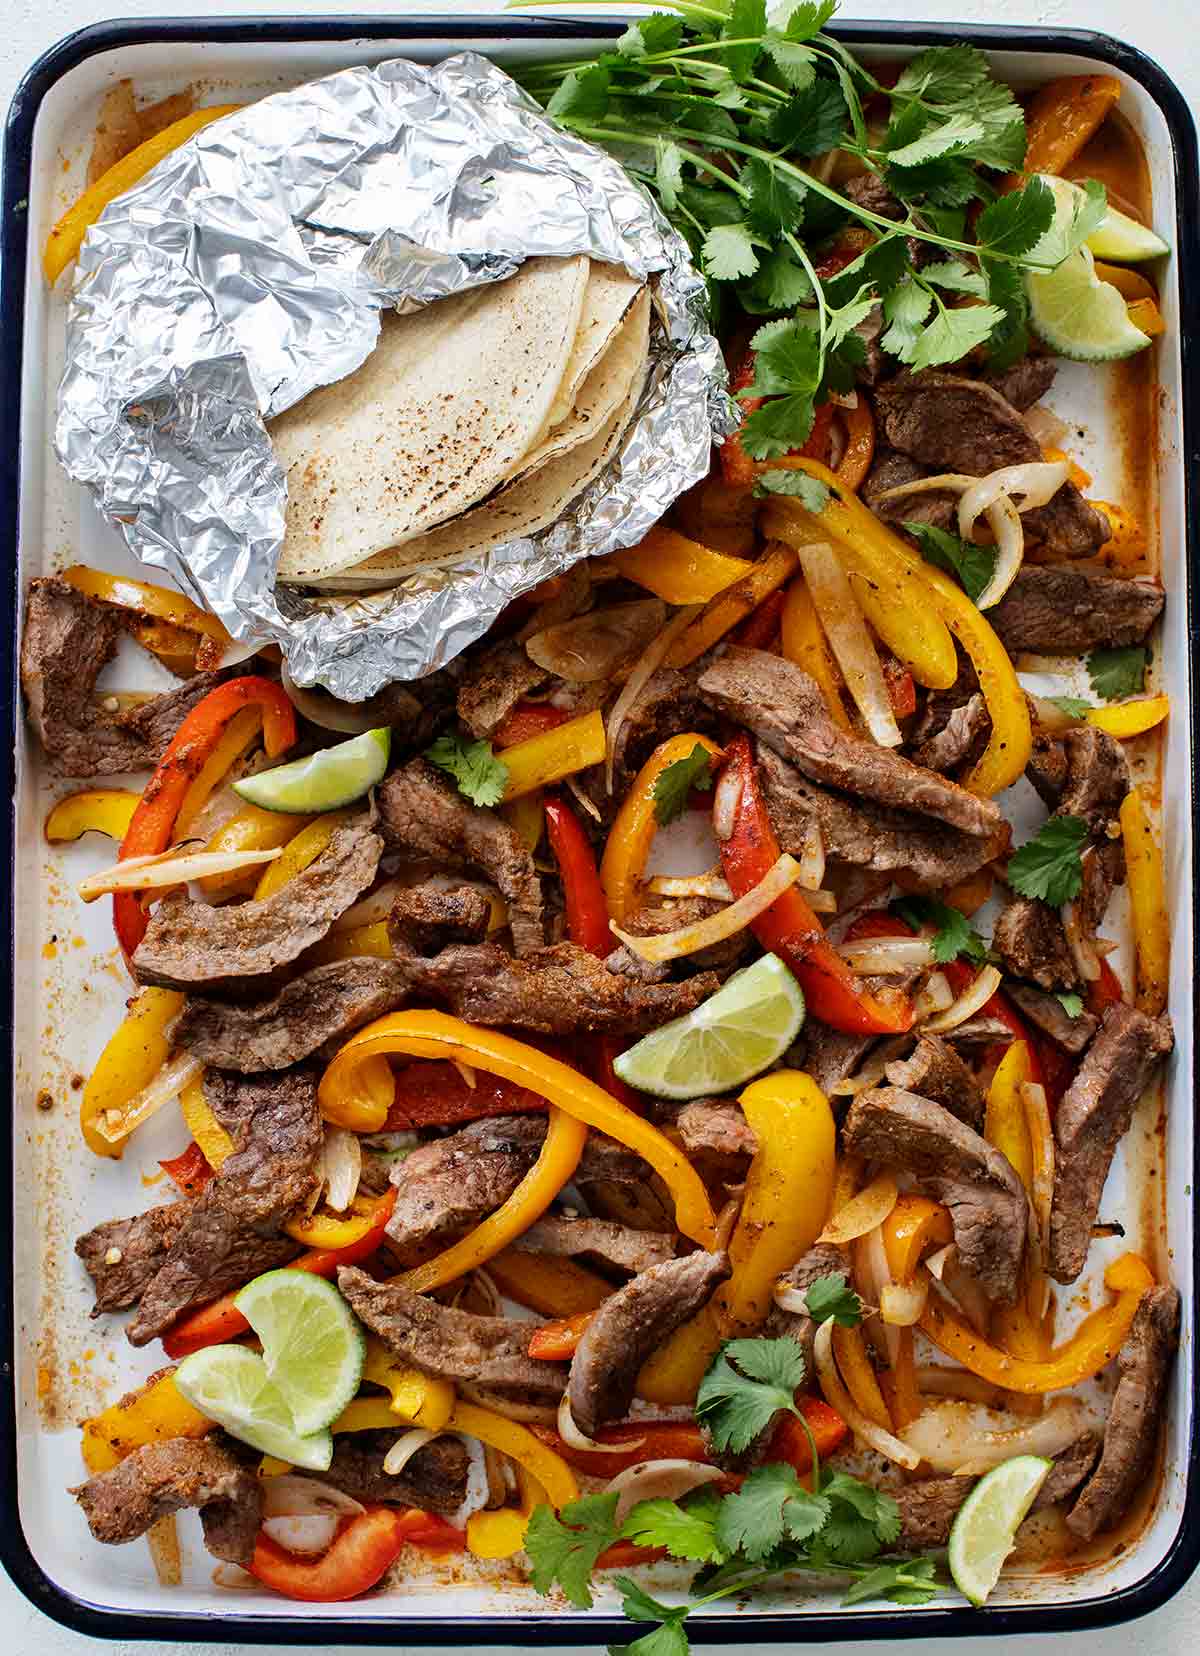 A metal tray filled with the fillings for sheet pan steak fajitas -- sliced steak, peppers, lime wedges, tortillas, and cilantro